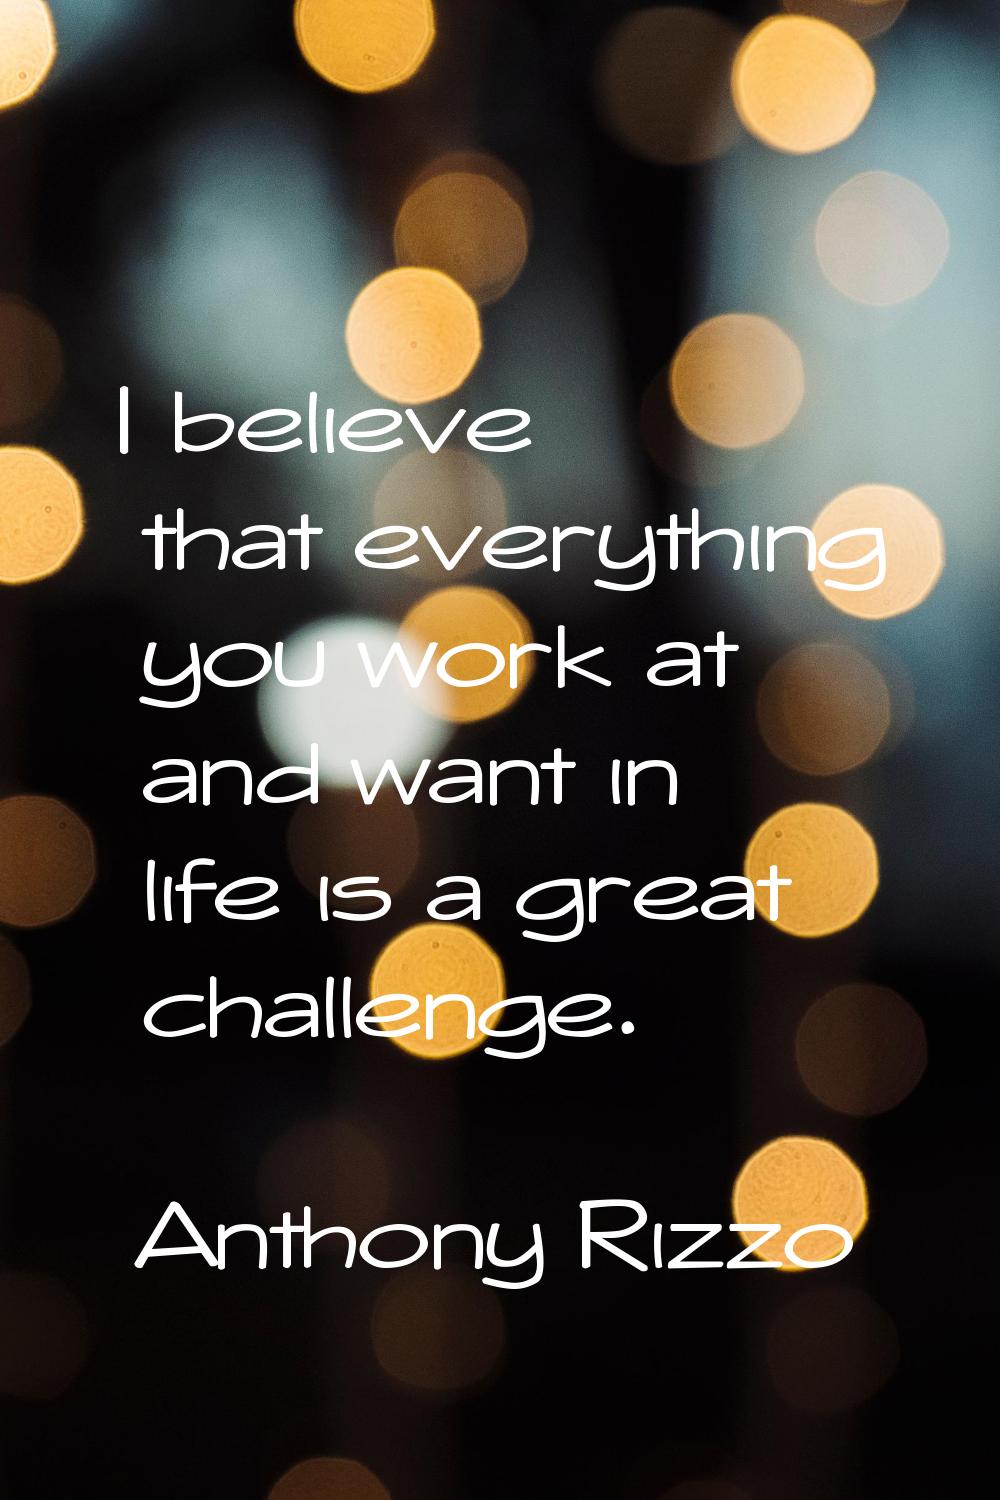 I believe that everything you work at and want in life is a great challenge.